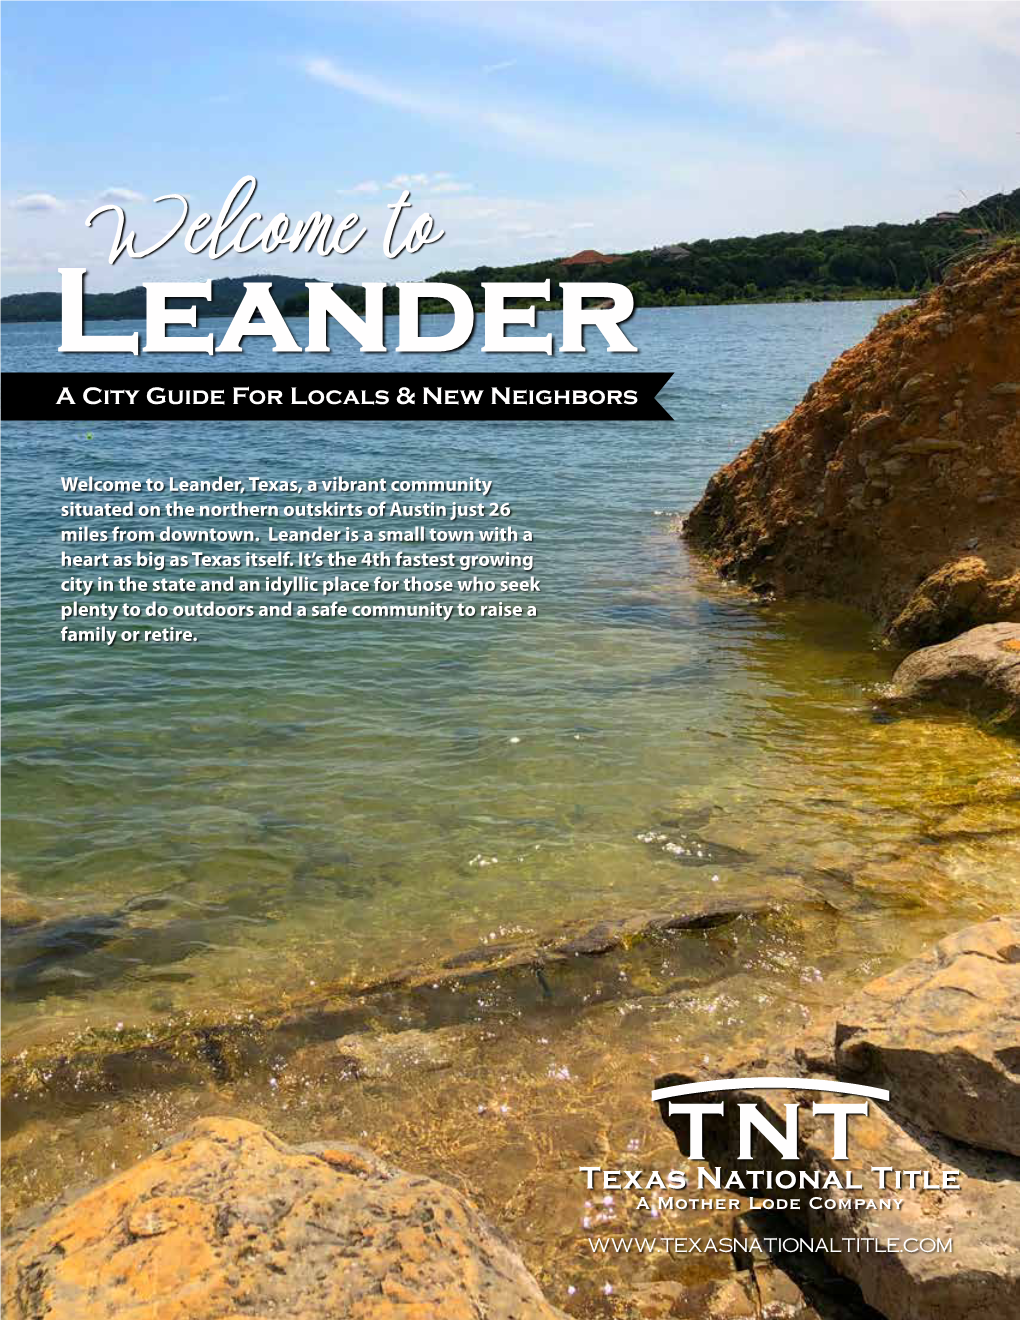 Welcome to Leander Drippinga City Guide Springs, for Locals & New Texas Neighbors